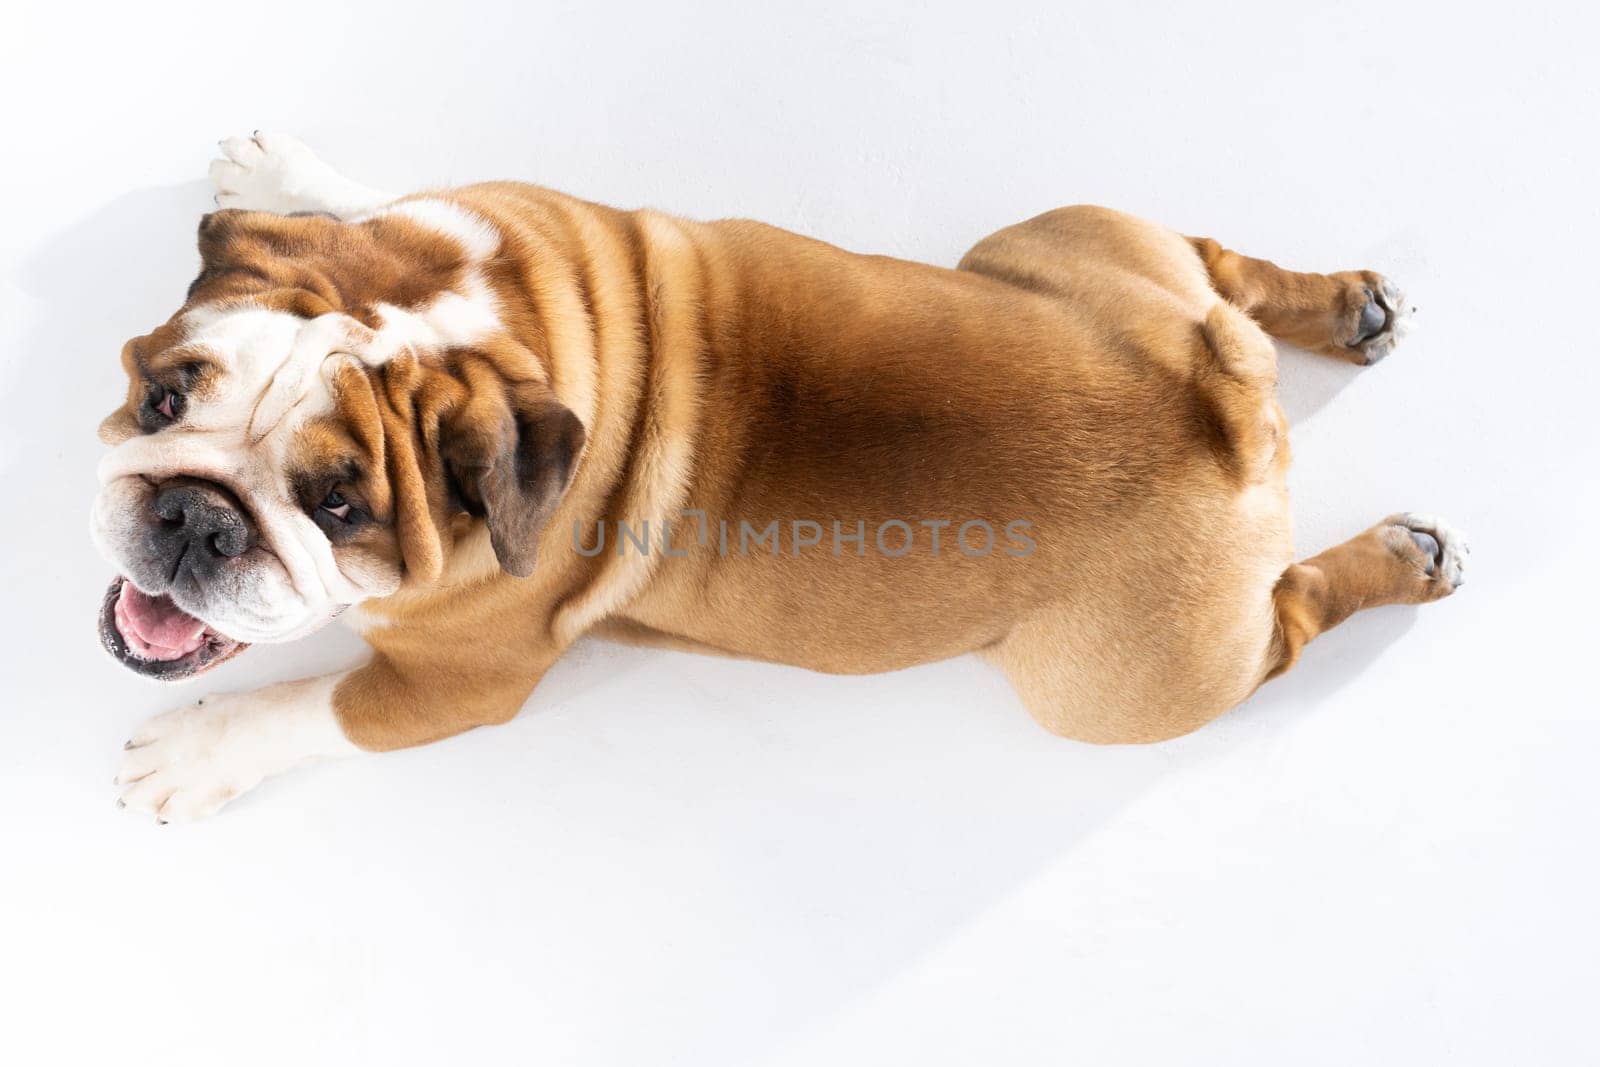 Let's look at the fat dog lying on the floor from above. The English Bulldog was bred as a companion and deterrent dog. A breed with a brown coat with white patches.